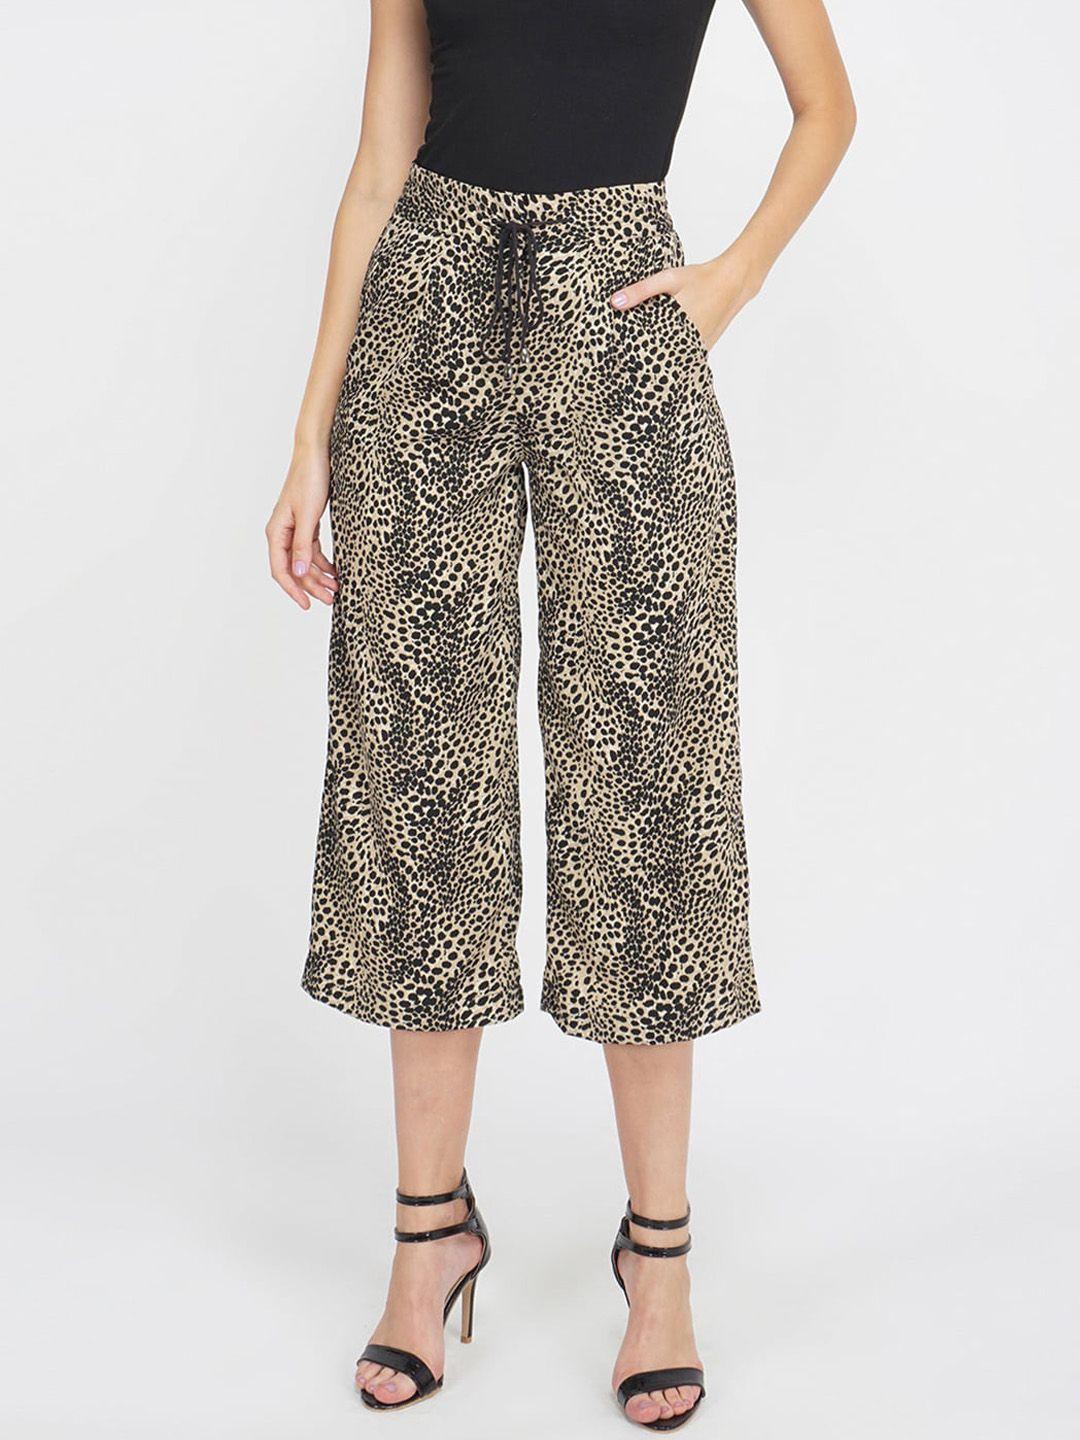 oxolloxo women beige animal printed high-rise culottes trousers